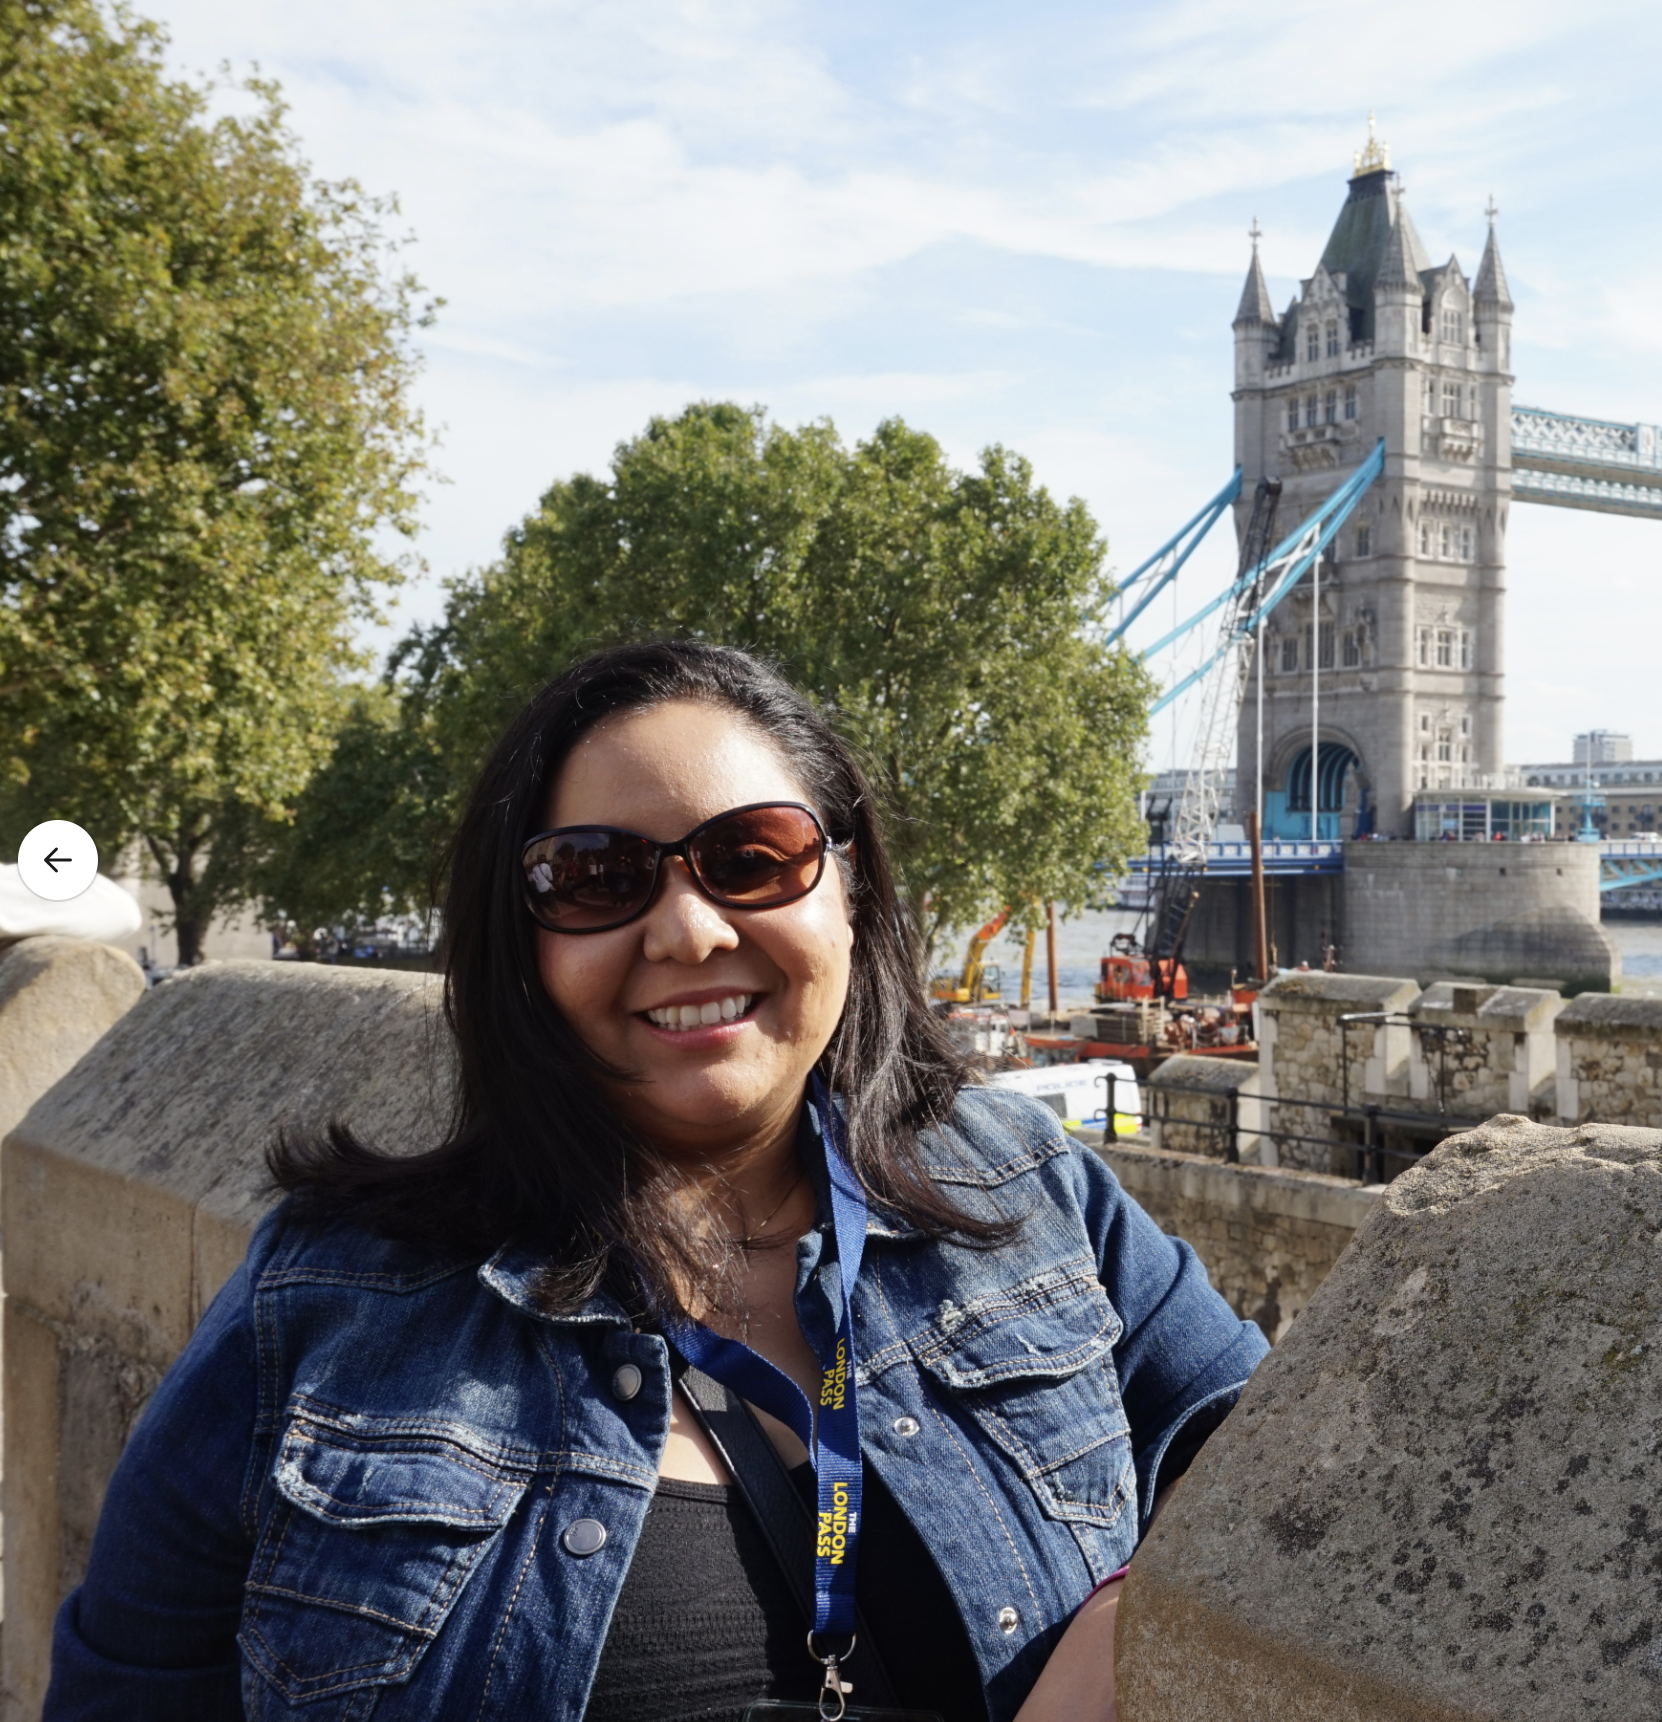 Photograph of Fran Alba in front of the Tower Bridge